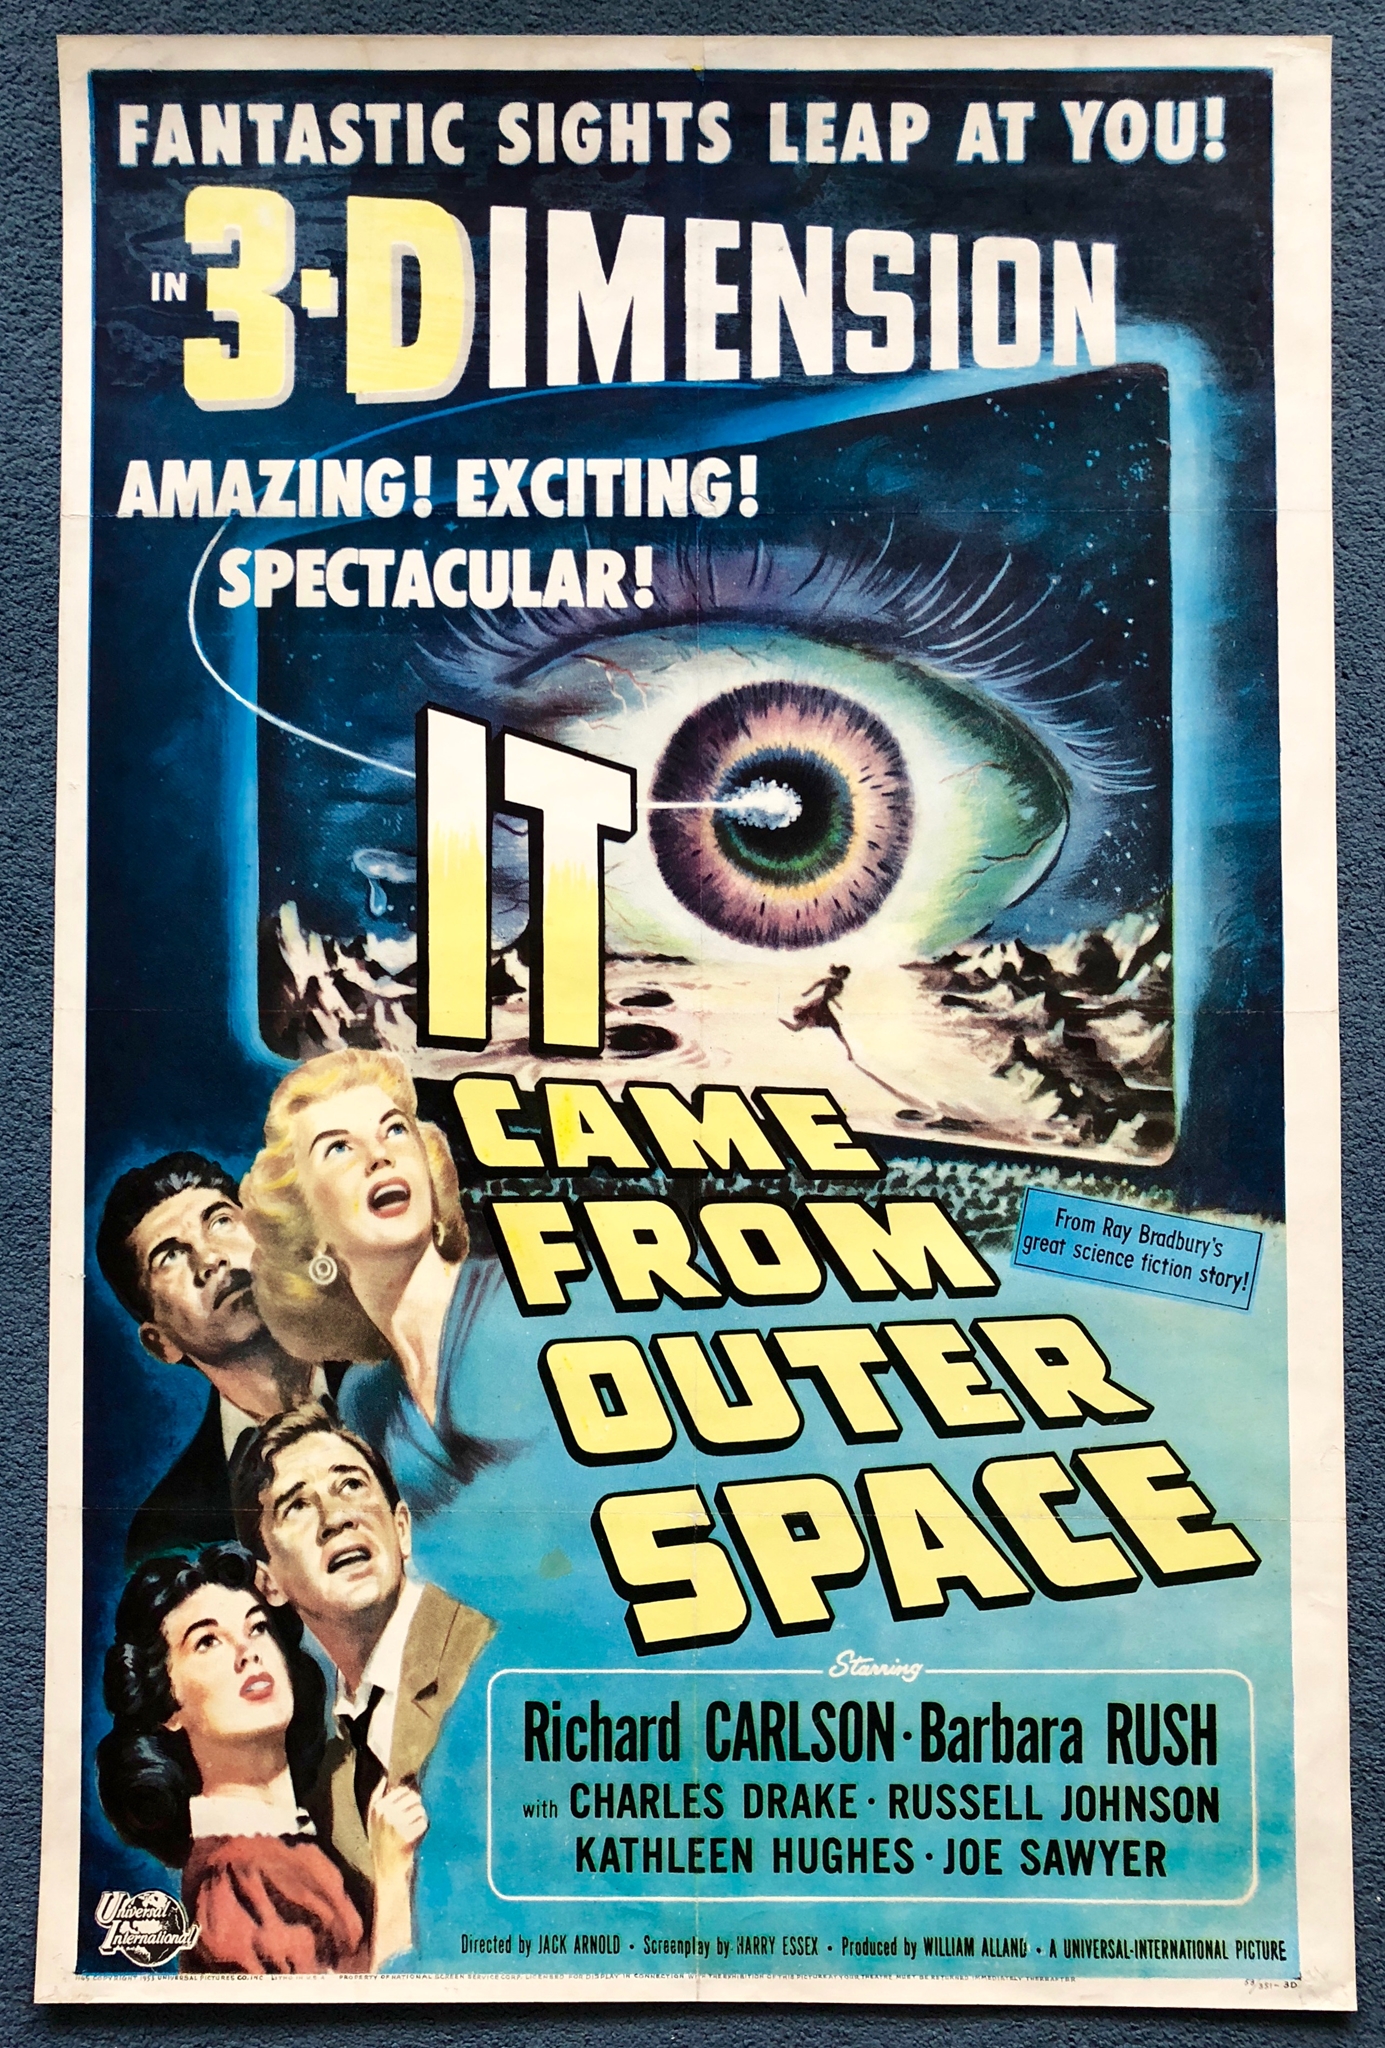 IT CAME FROM OUTER SPACE (1953) - US One Sheet Movie Poster - 27" x 41" (68.5 x 104 cm) - Joseph